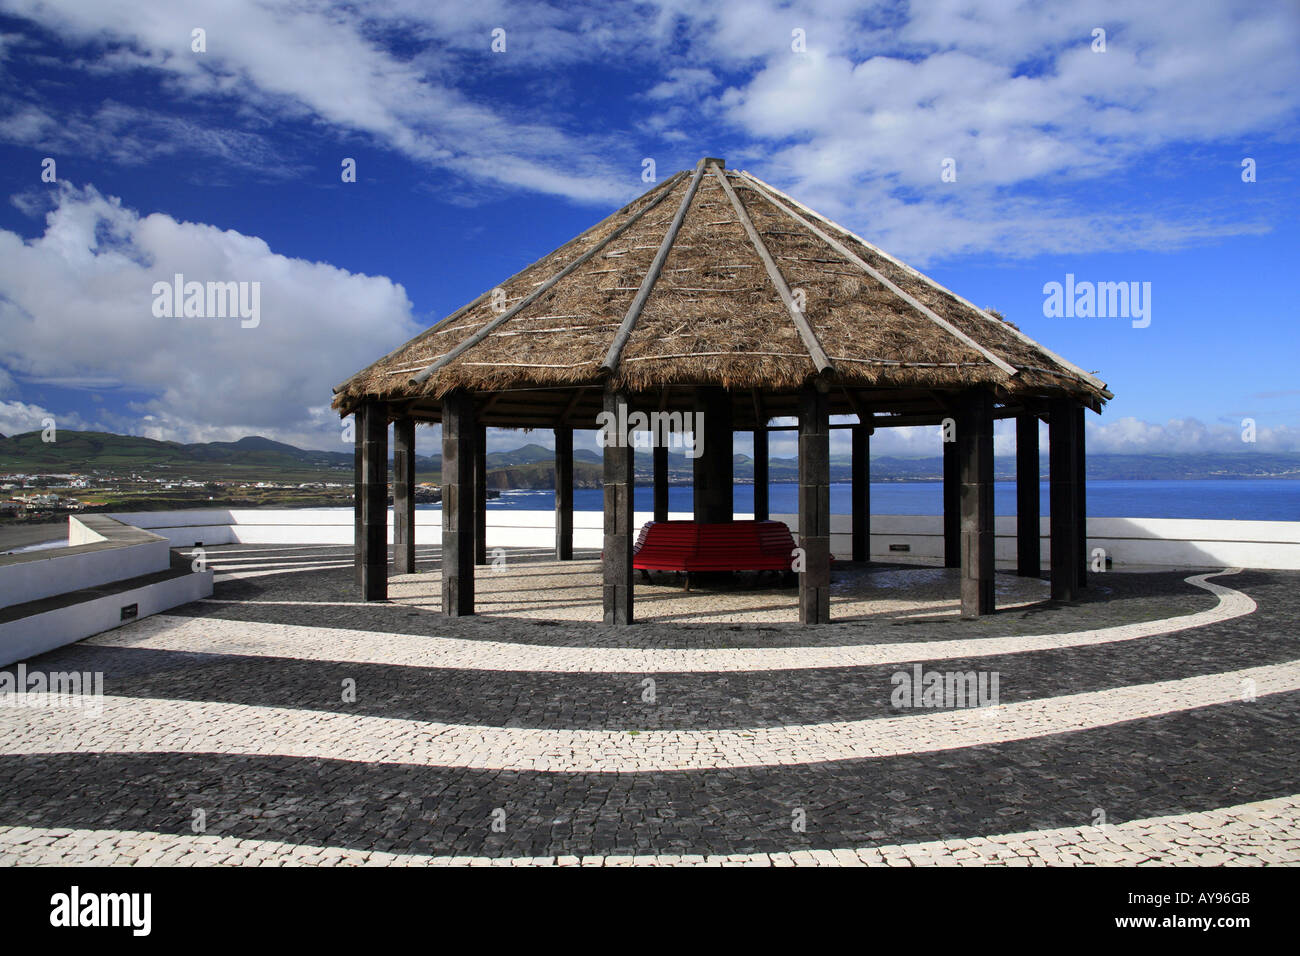 Azores Gazebo Belvedere High Resolution Stock Photography and Images - Alamy